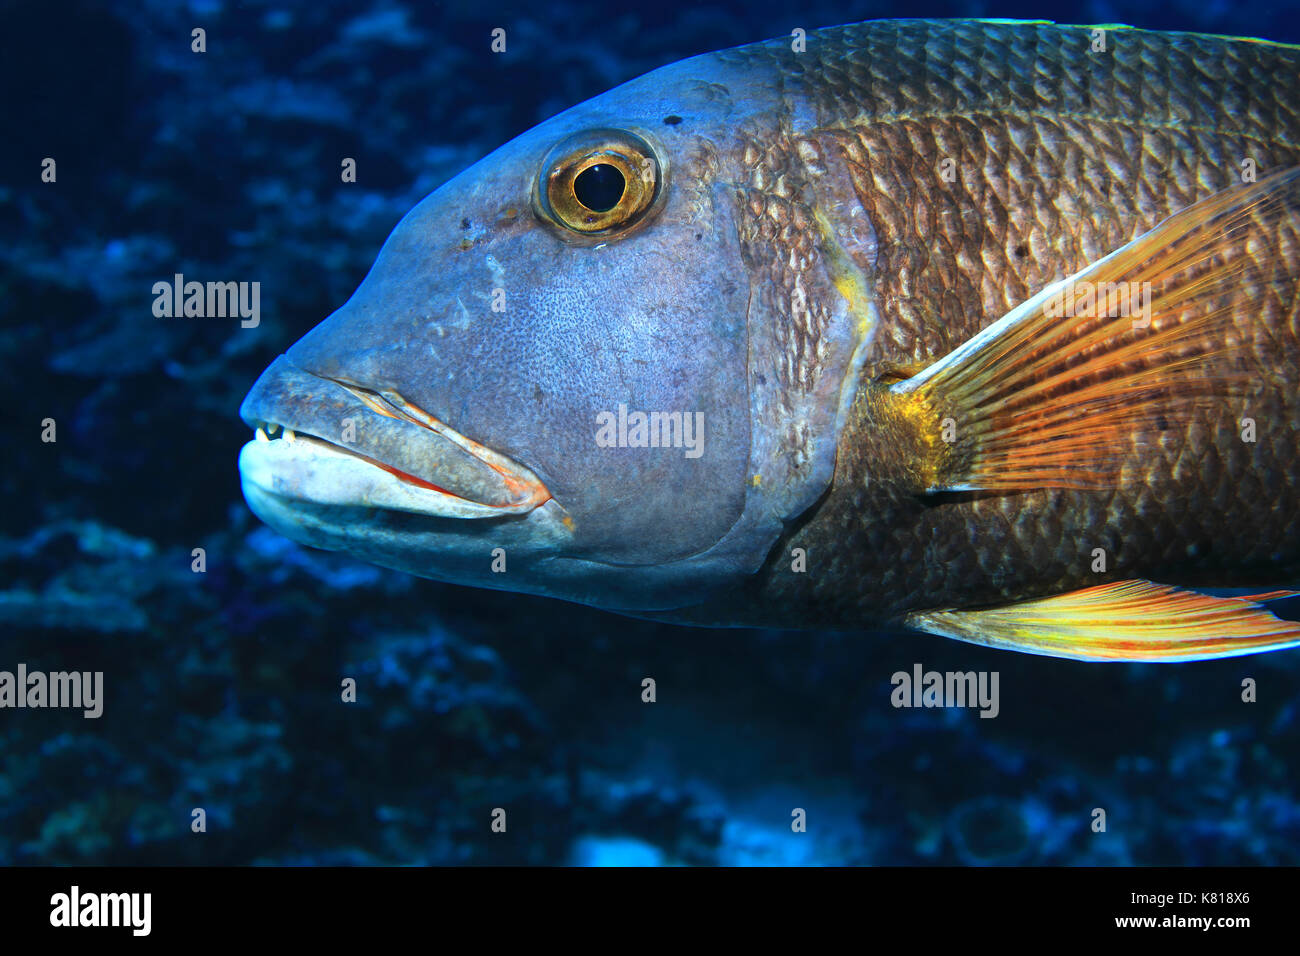 Orange-spotted emperor fish (Lethrinus erythracanthus) underwater in the tropical indian ocean Stock Photo